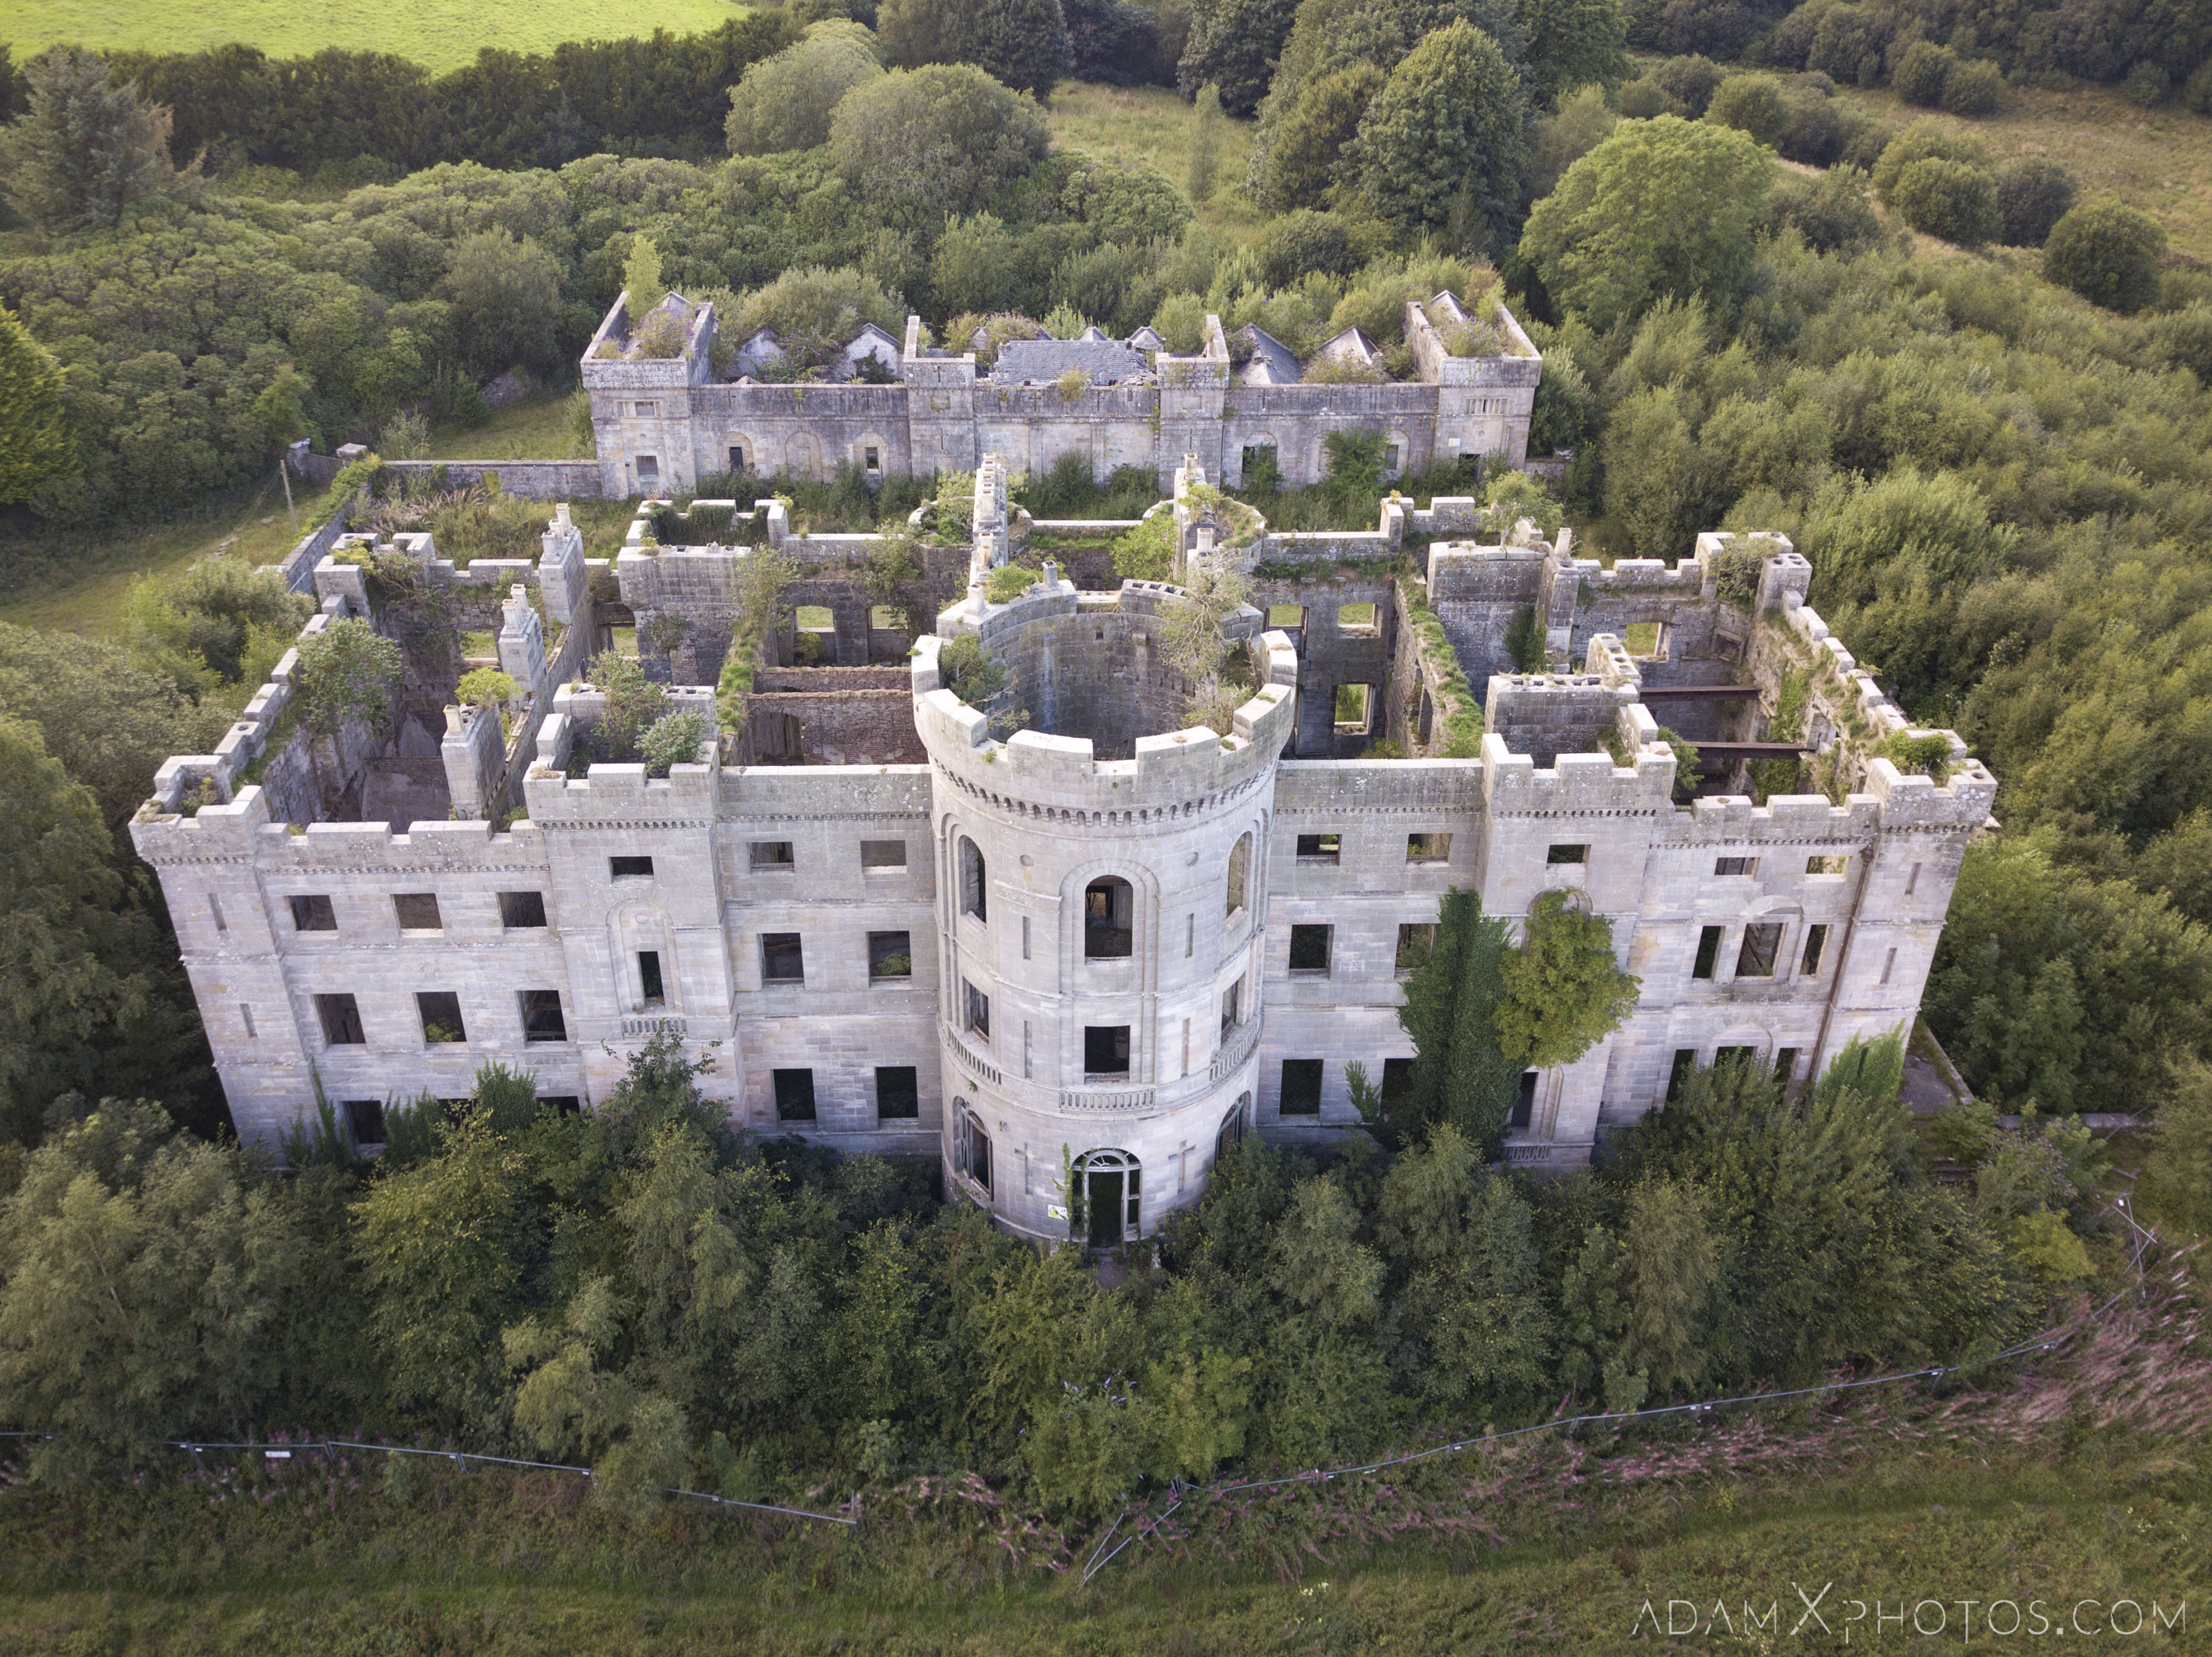 Drone Mavic from above aerial view overgrown Dalquharran Castle Ayrshire Scotland Adam X Urbex Urban Exploration Access 2018 Abandoned decay ruins lost forgotten derelict location creepy haunting eerie